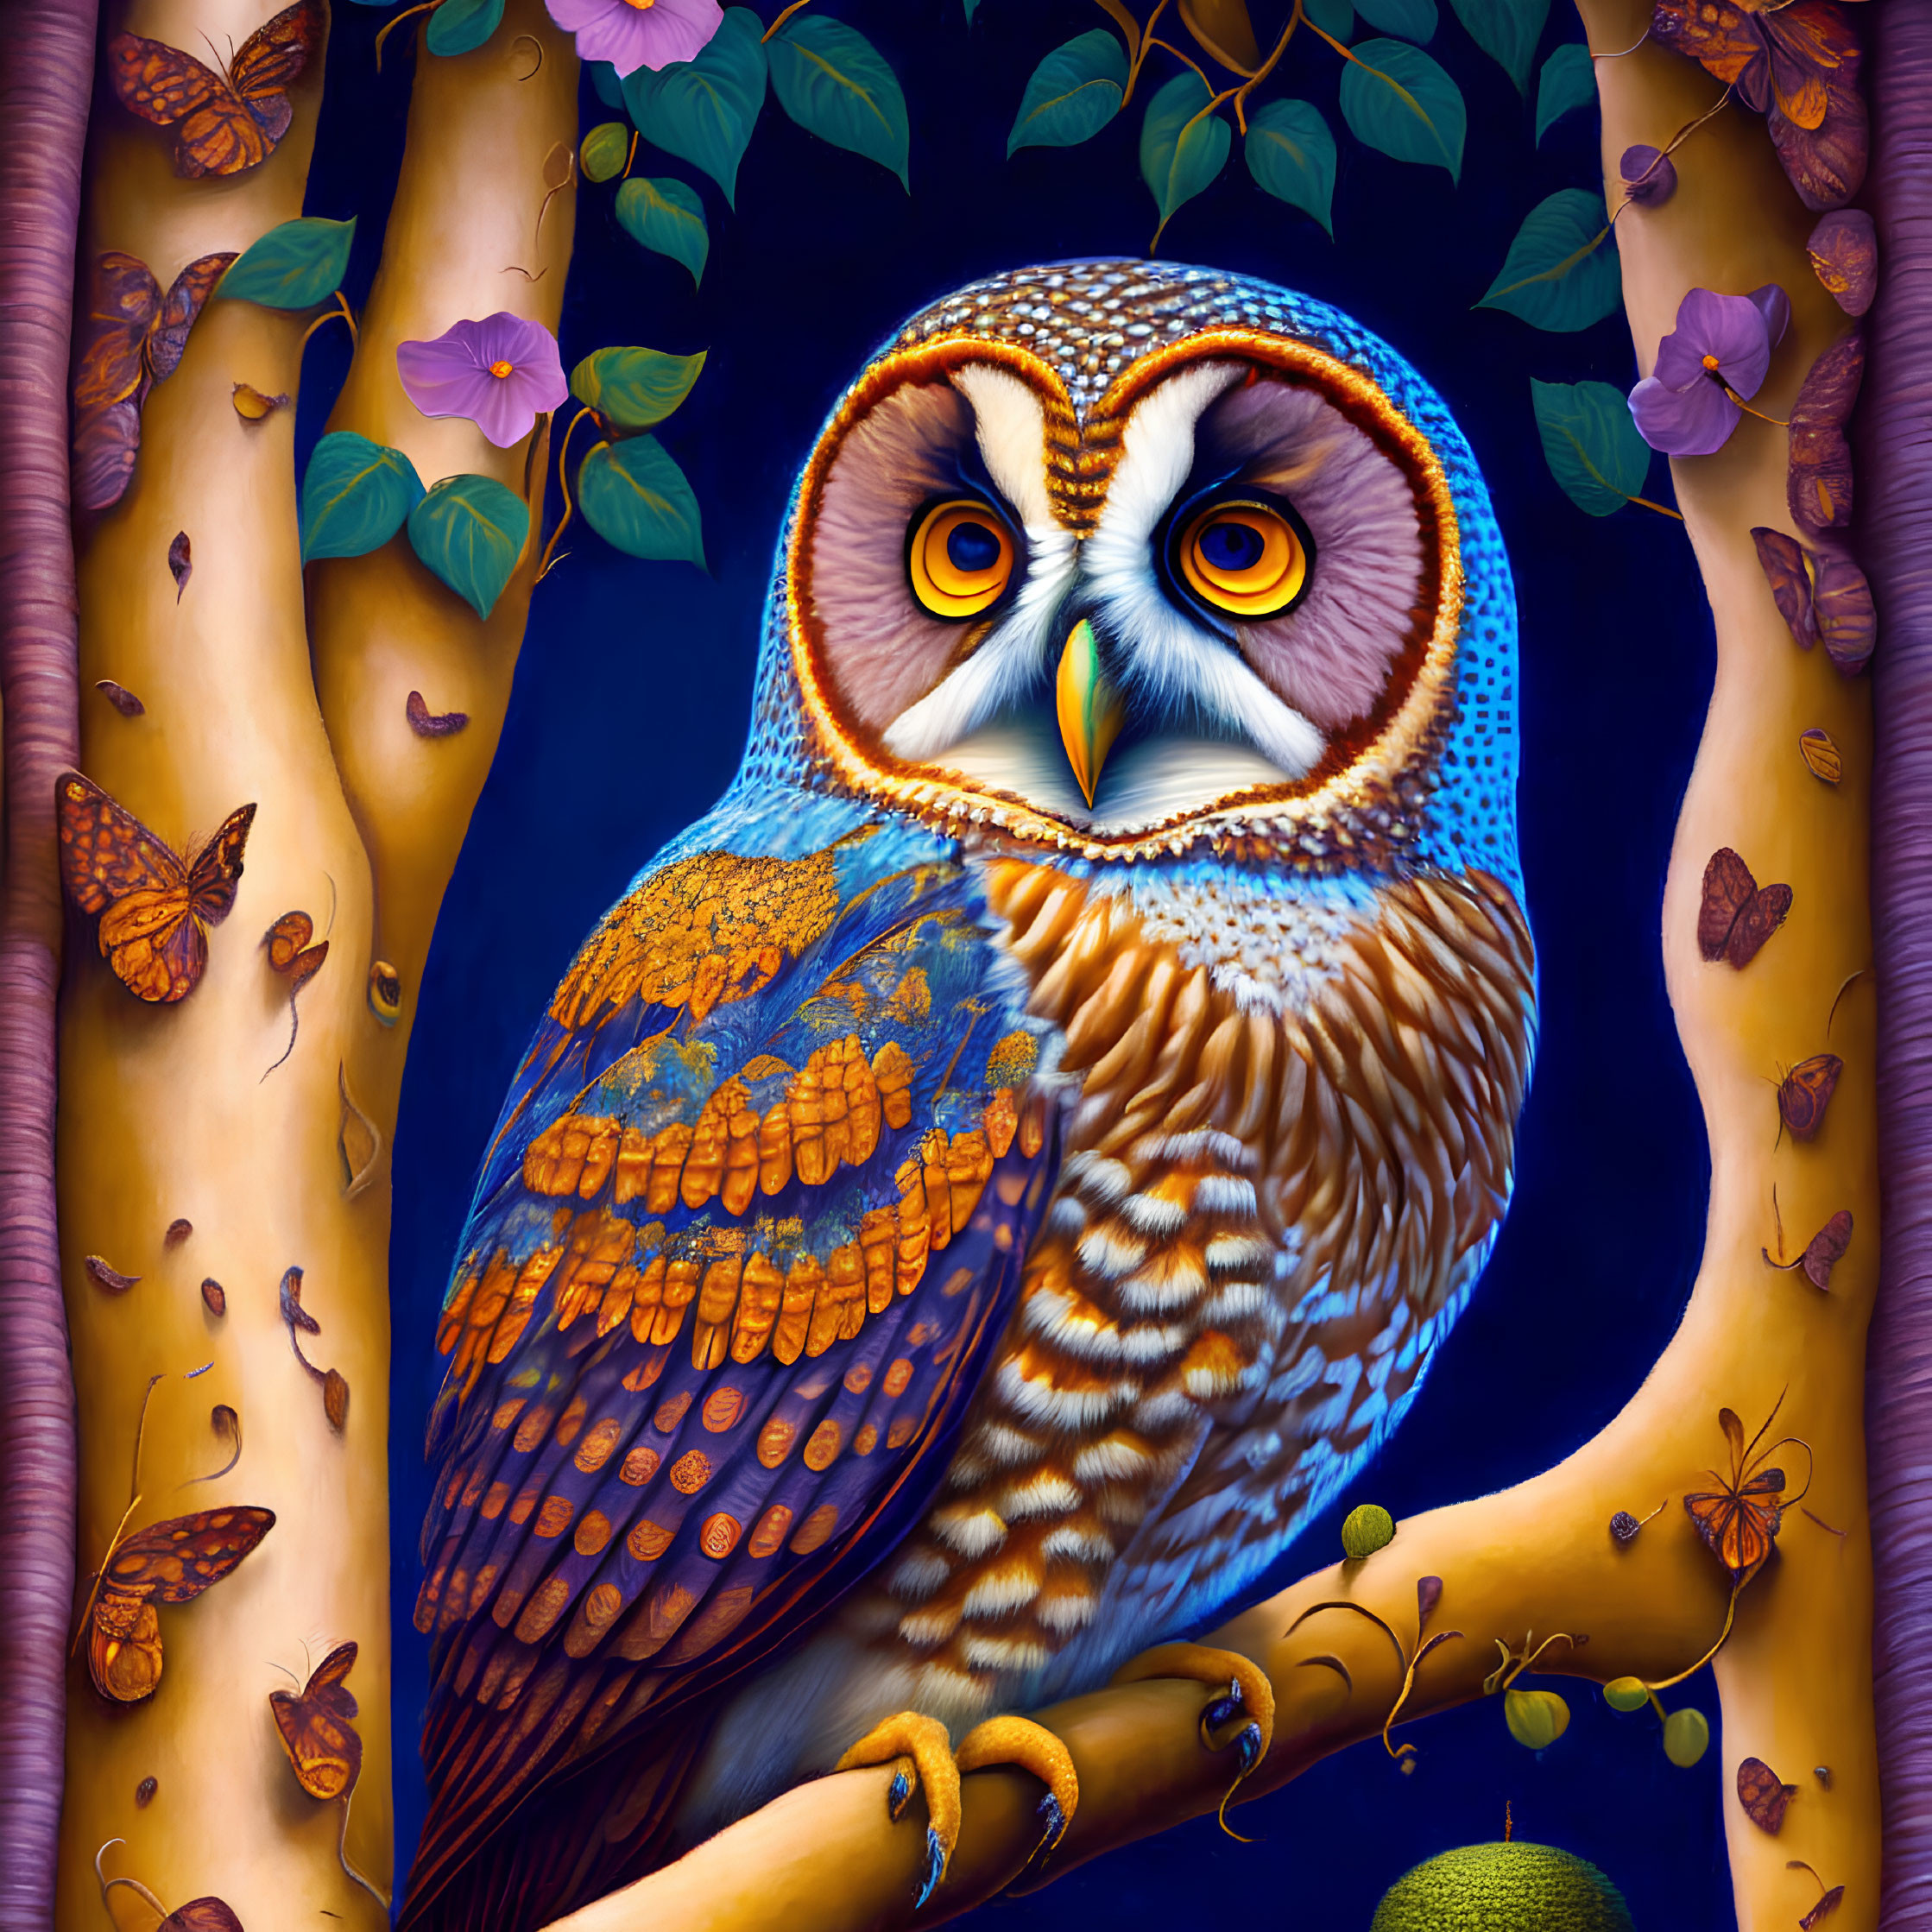 Colorful Owl Perched on Branch with Butterflies and Foliage on Blue Background